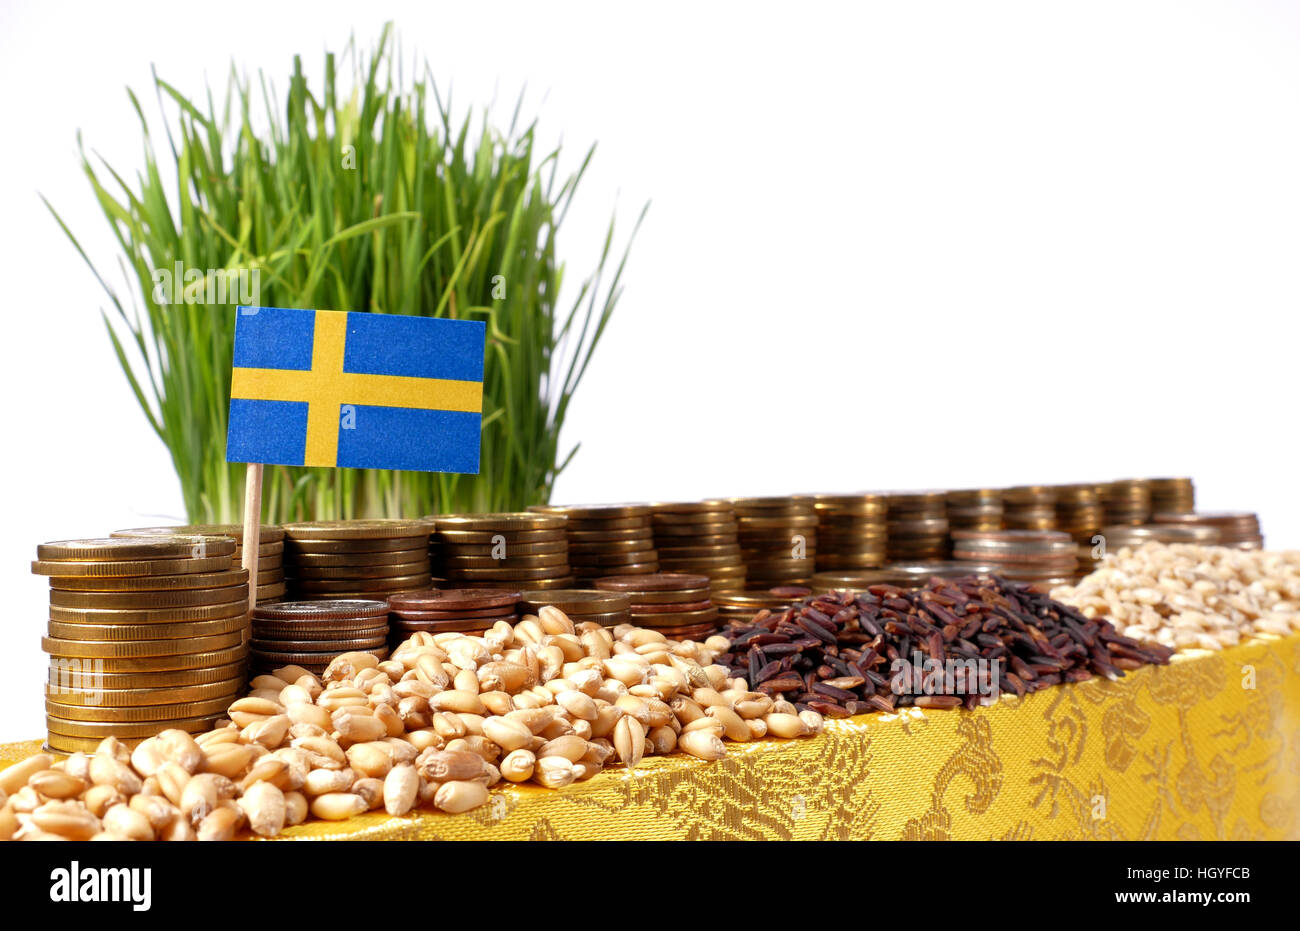 Sweden flag waving with stack of money coins and piles of wheat and rice seeds Stock Photo